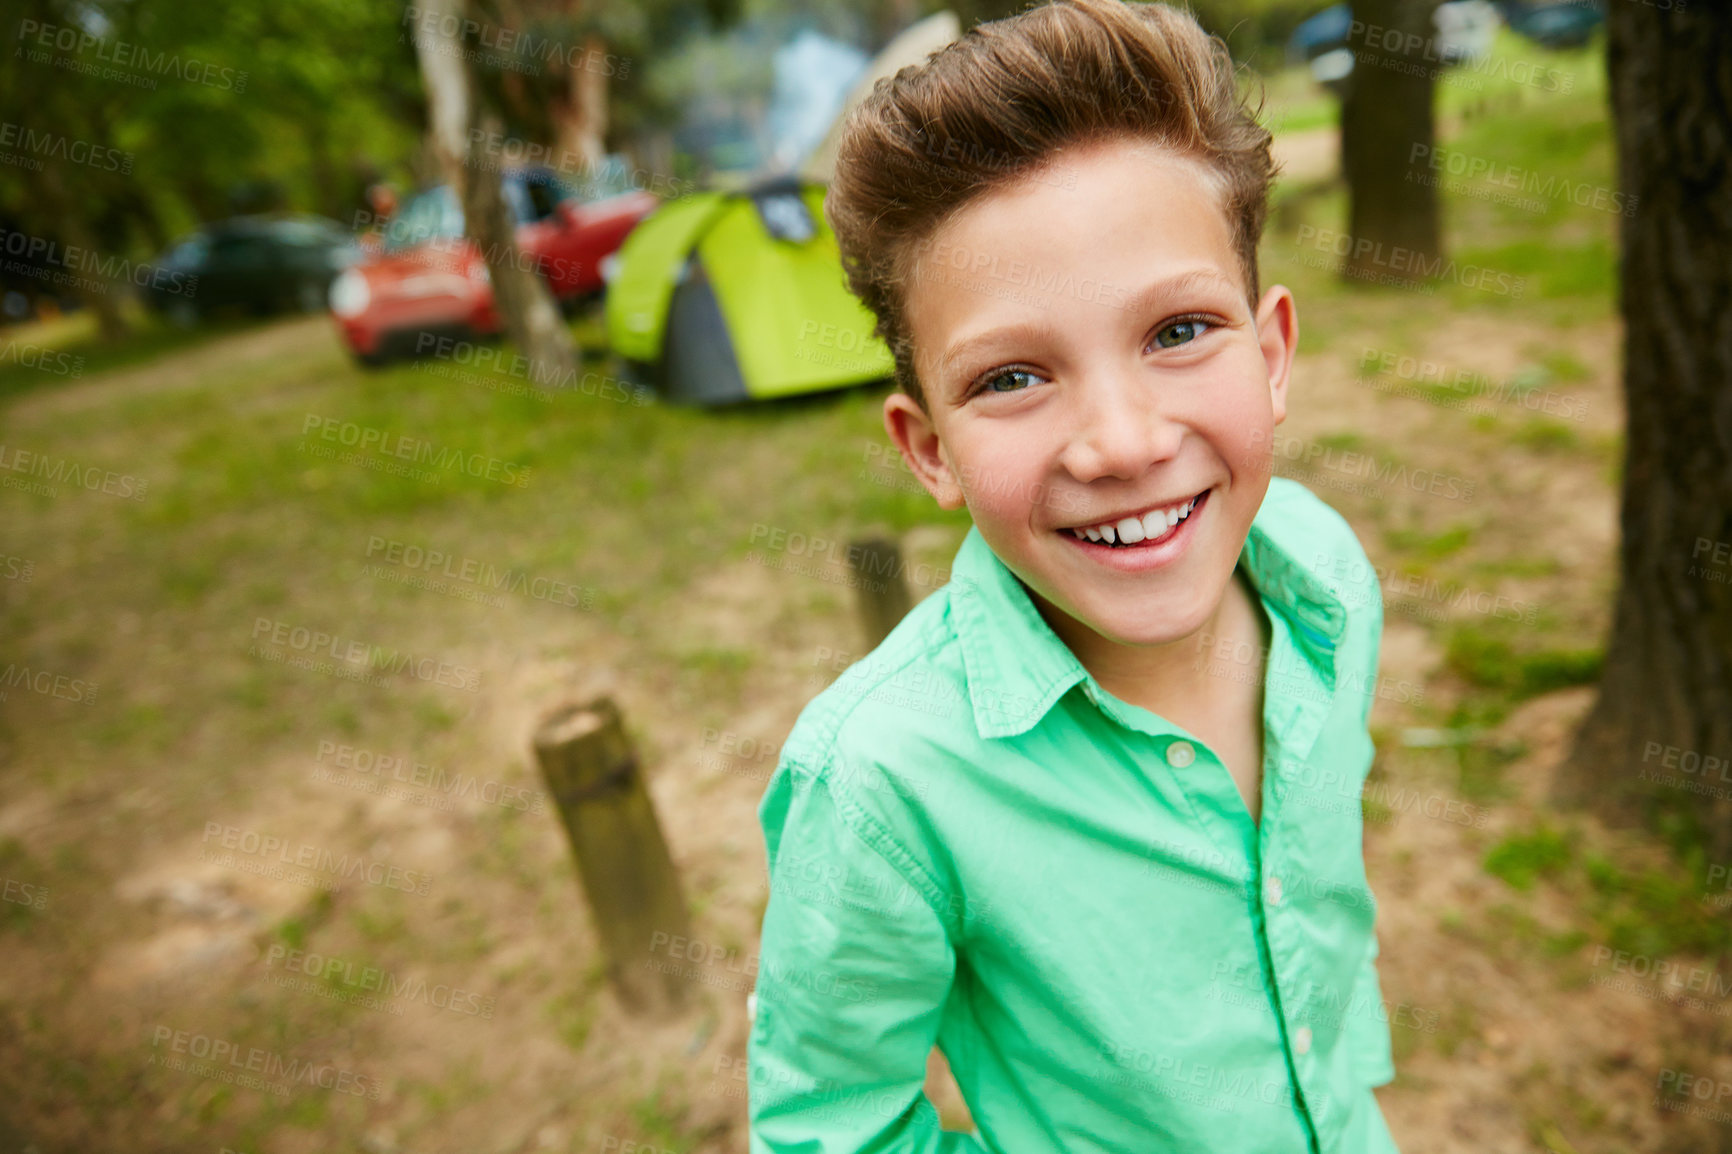 Buy stock photo Portrait of a cute boy child on a camping trip. Closeup of smiling kid having fun while in a forest with tents in the background. Cheerful kid excited about spending time in nature